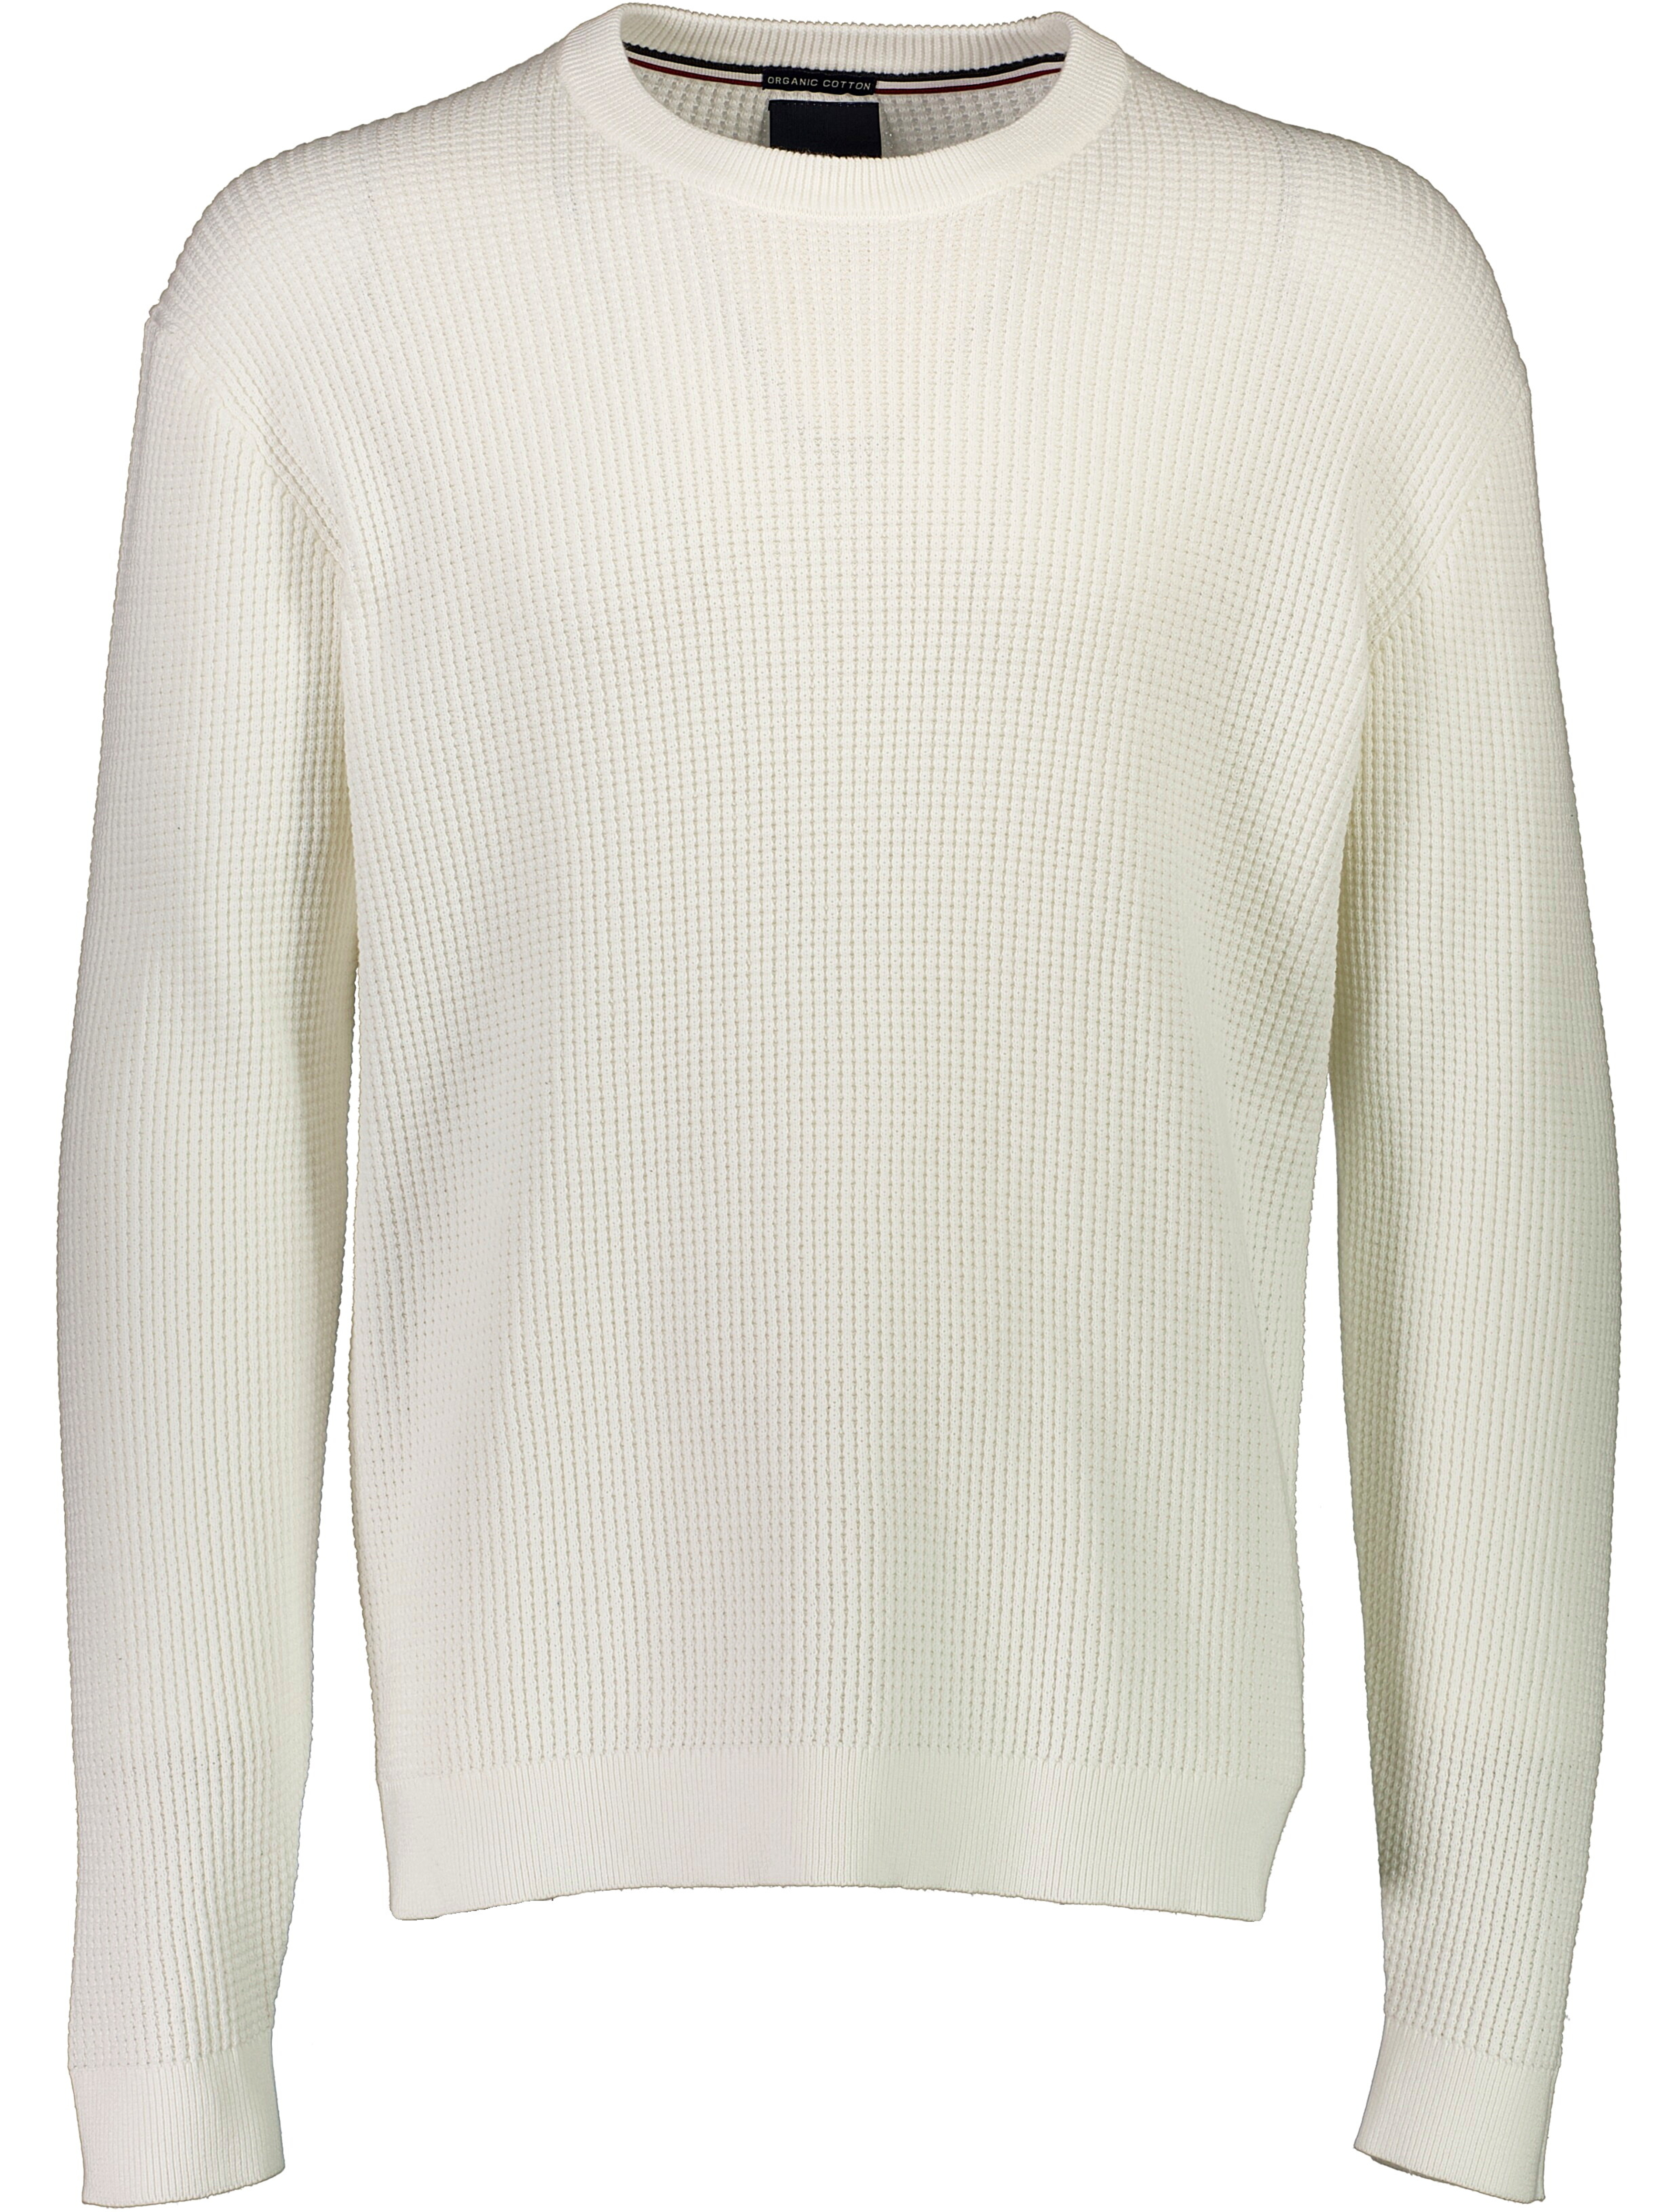 Lindbergh Strickpullover weiss / off white